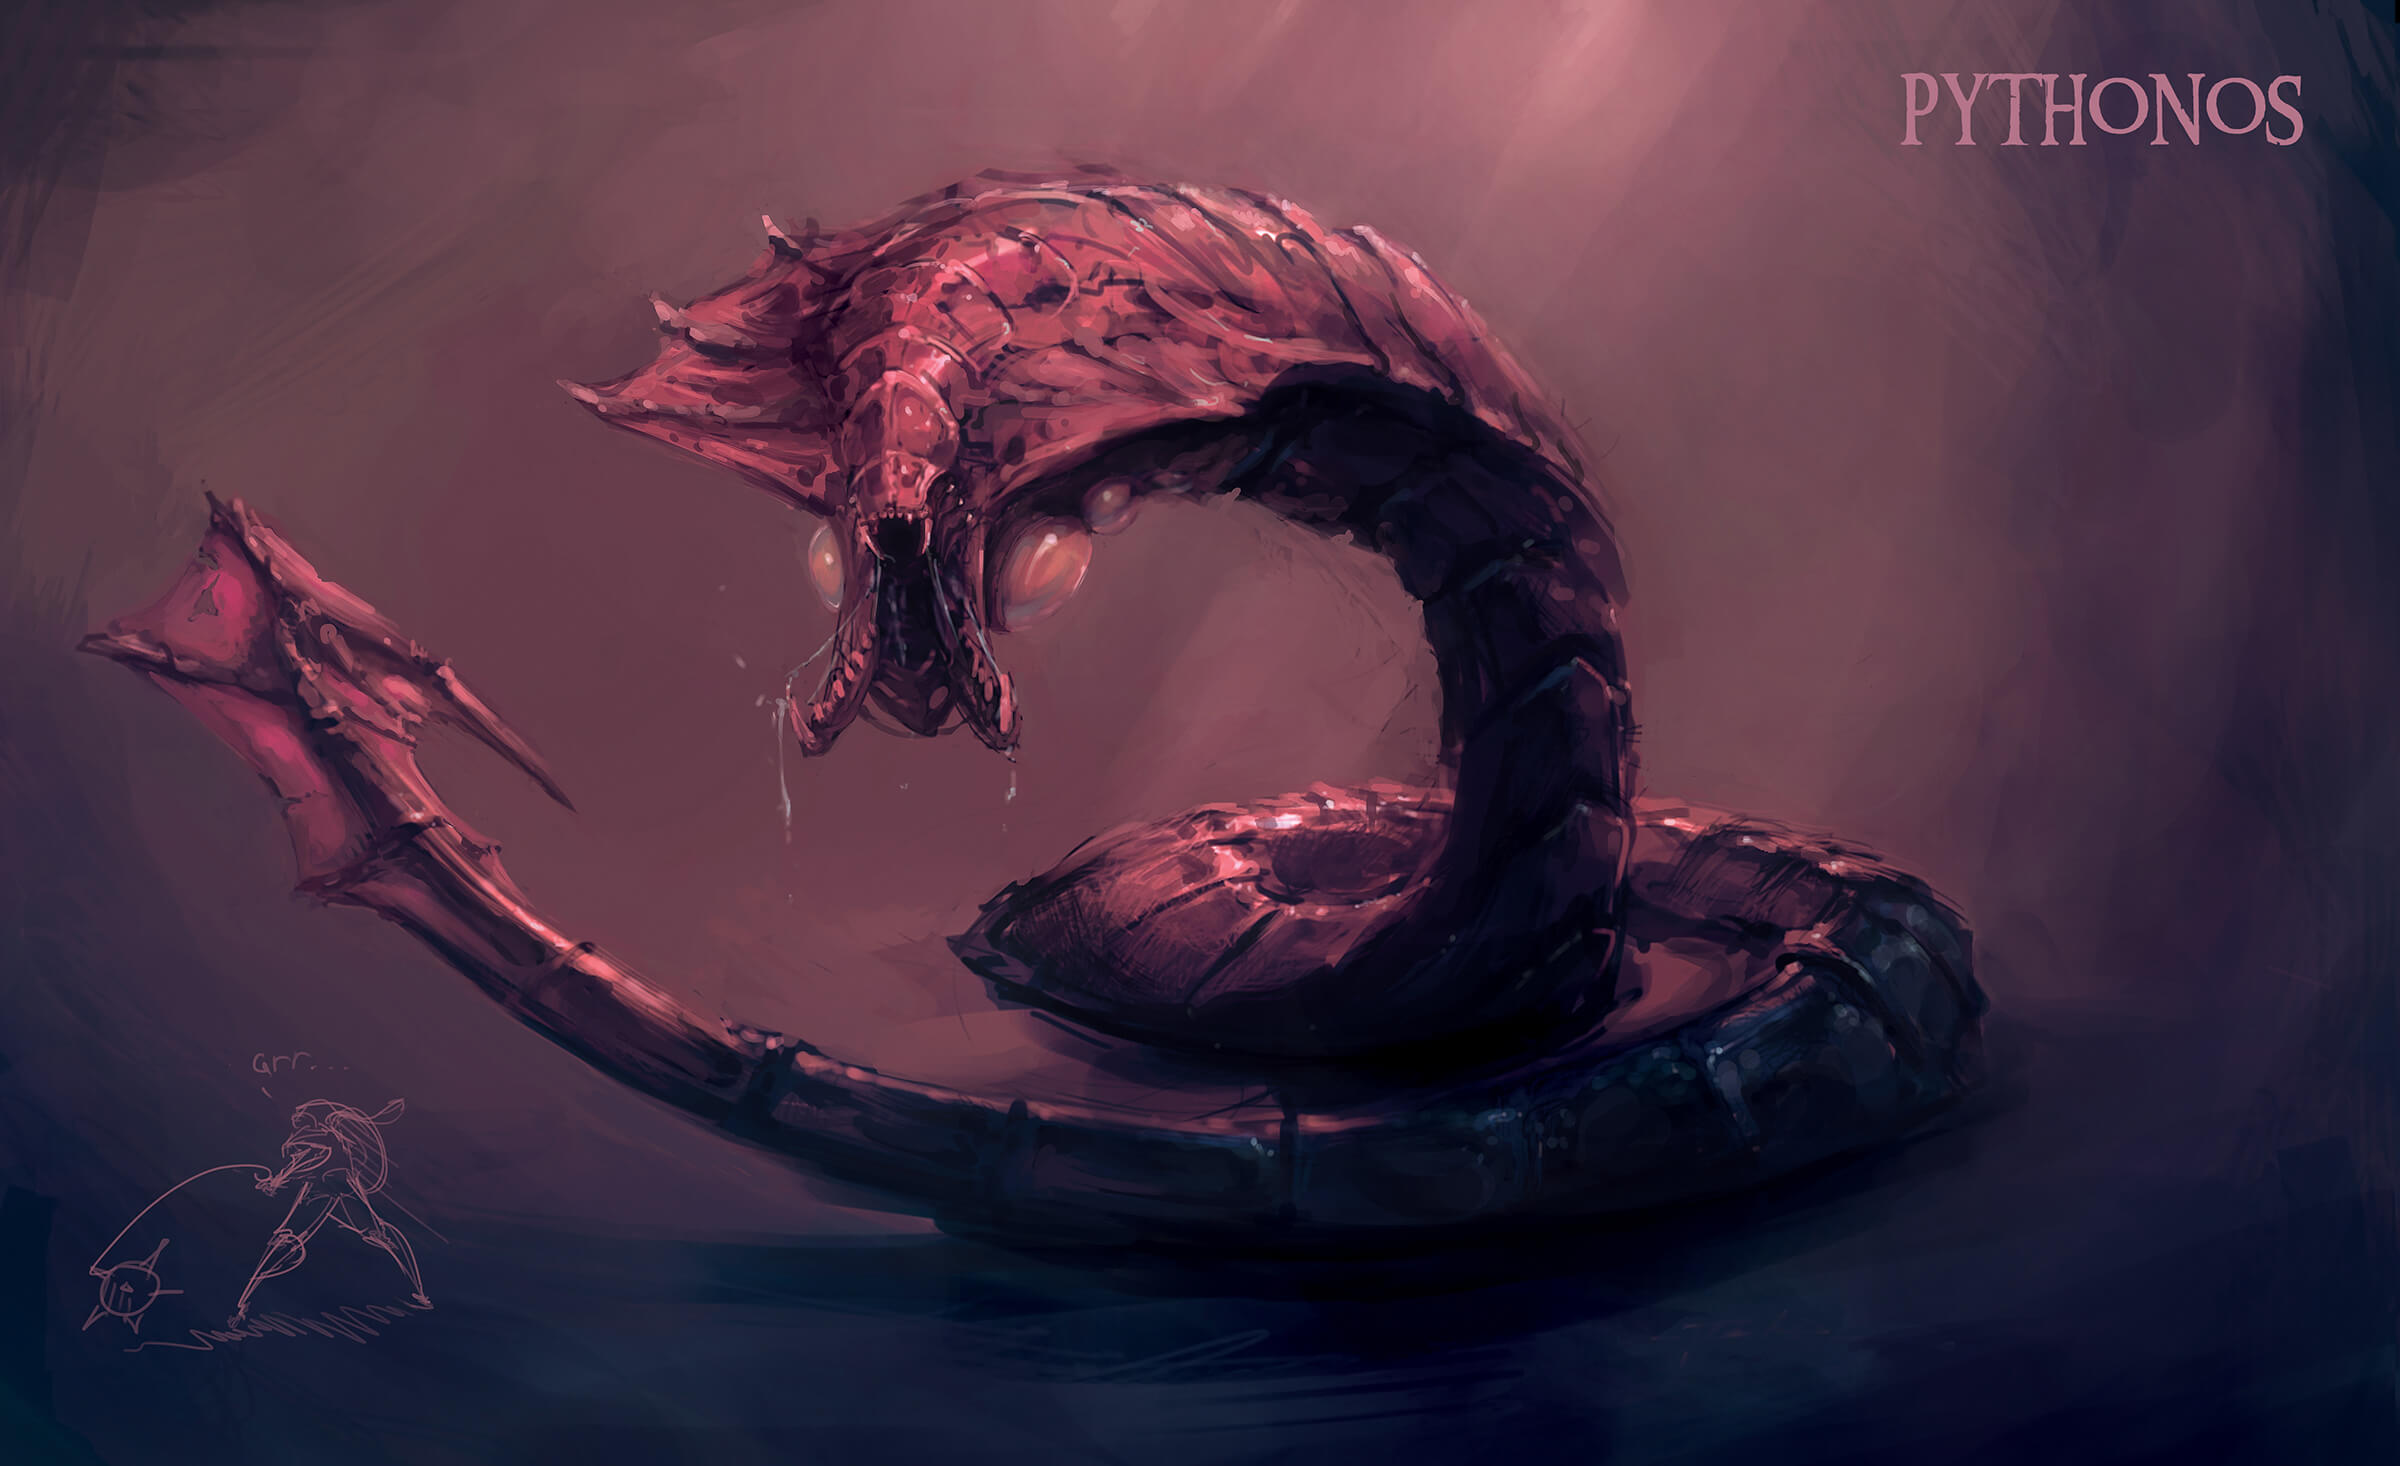 A segmented worm-like monster ending in a sharp barb bares an open trap-jaw mouth filled with teeth under a dim, red light.